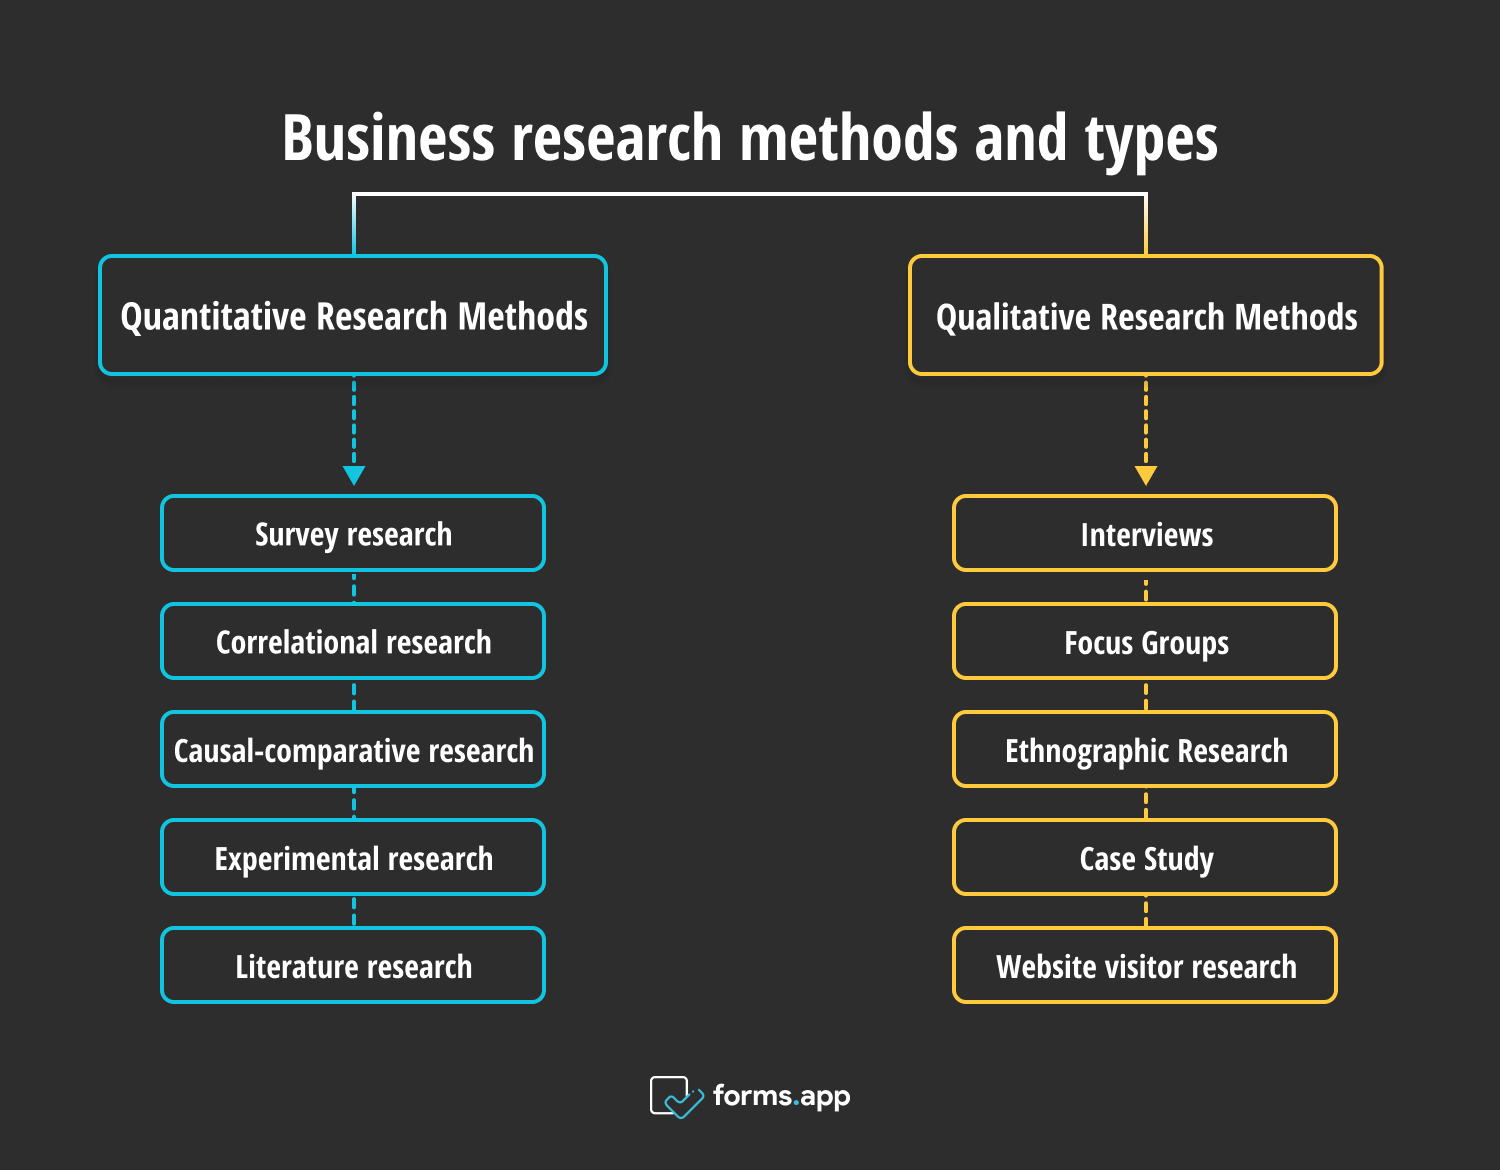 Business research methods and types